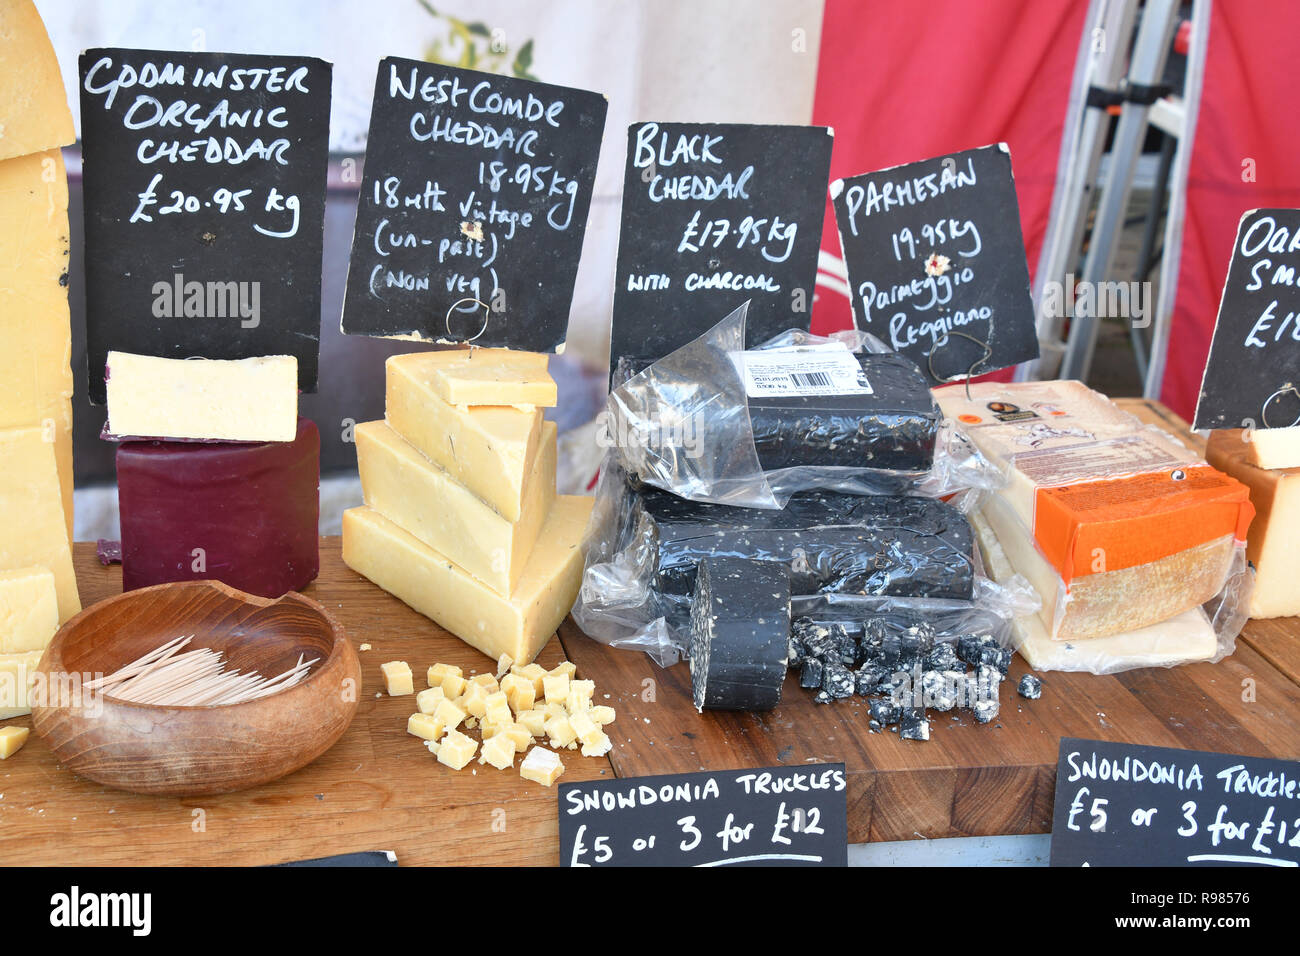 Cheeses on market stall in Somerset displayed with samples for tasting.Godminster Organic Cheddar,Westcombe Cheddar,Black Cheddar,Parmesan. England,UK Stock Photo